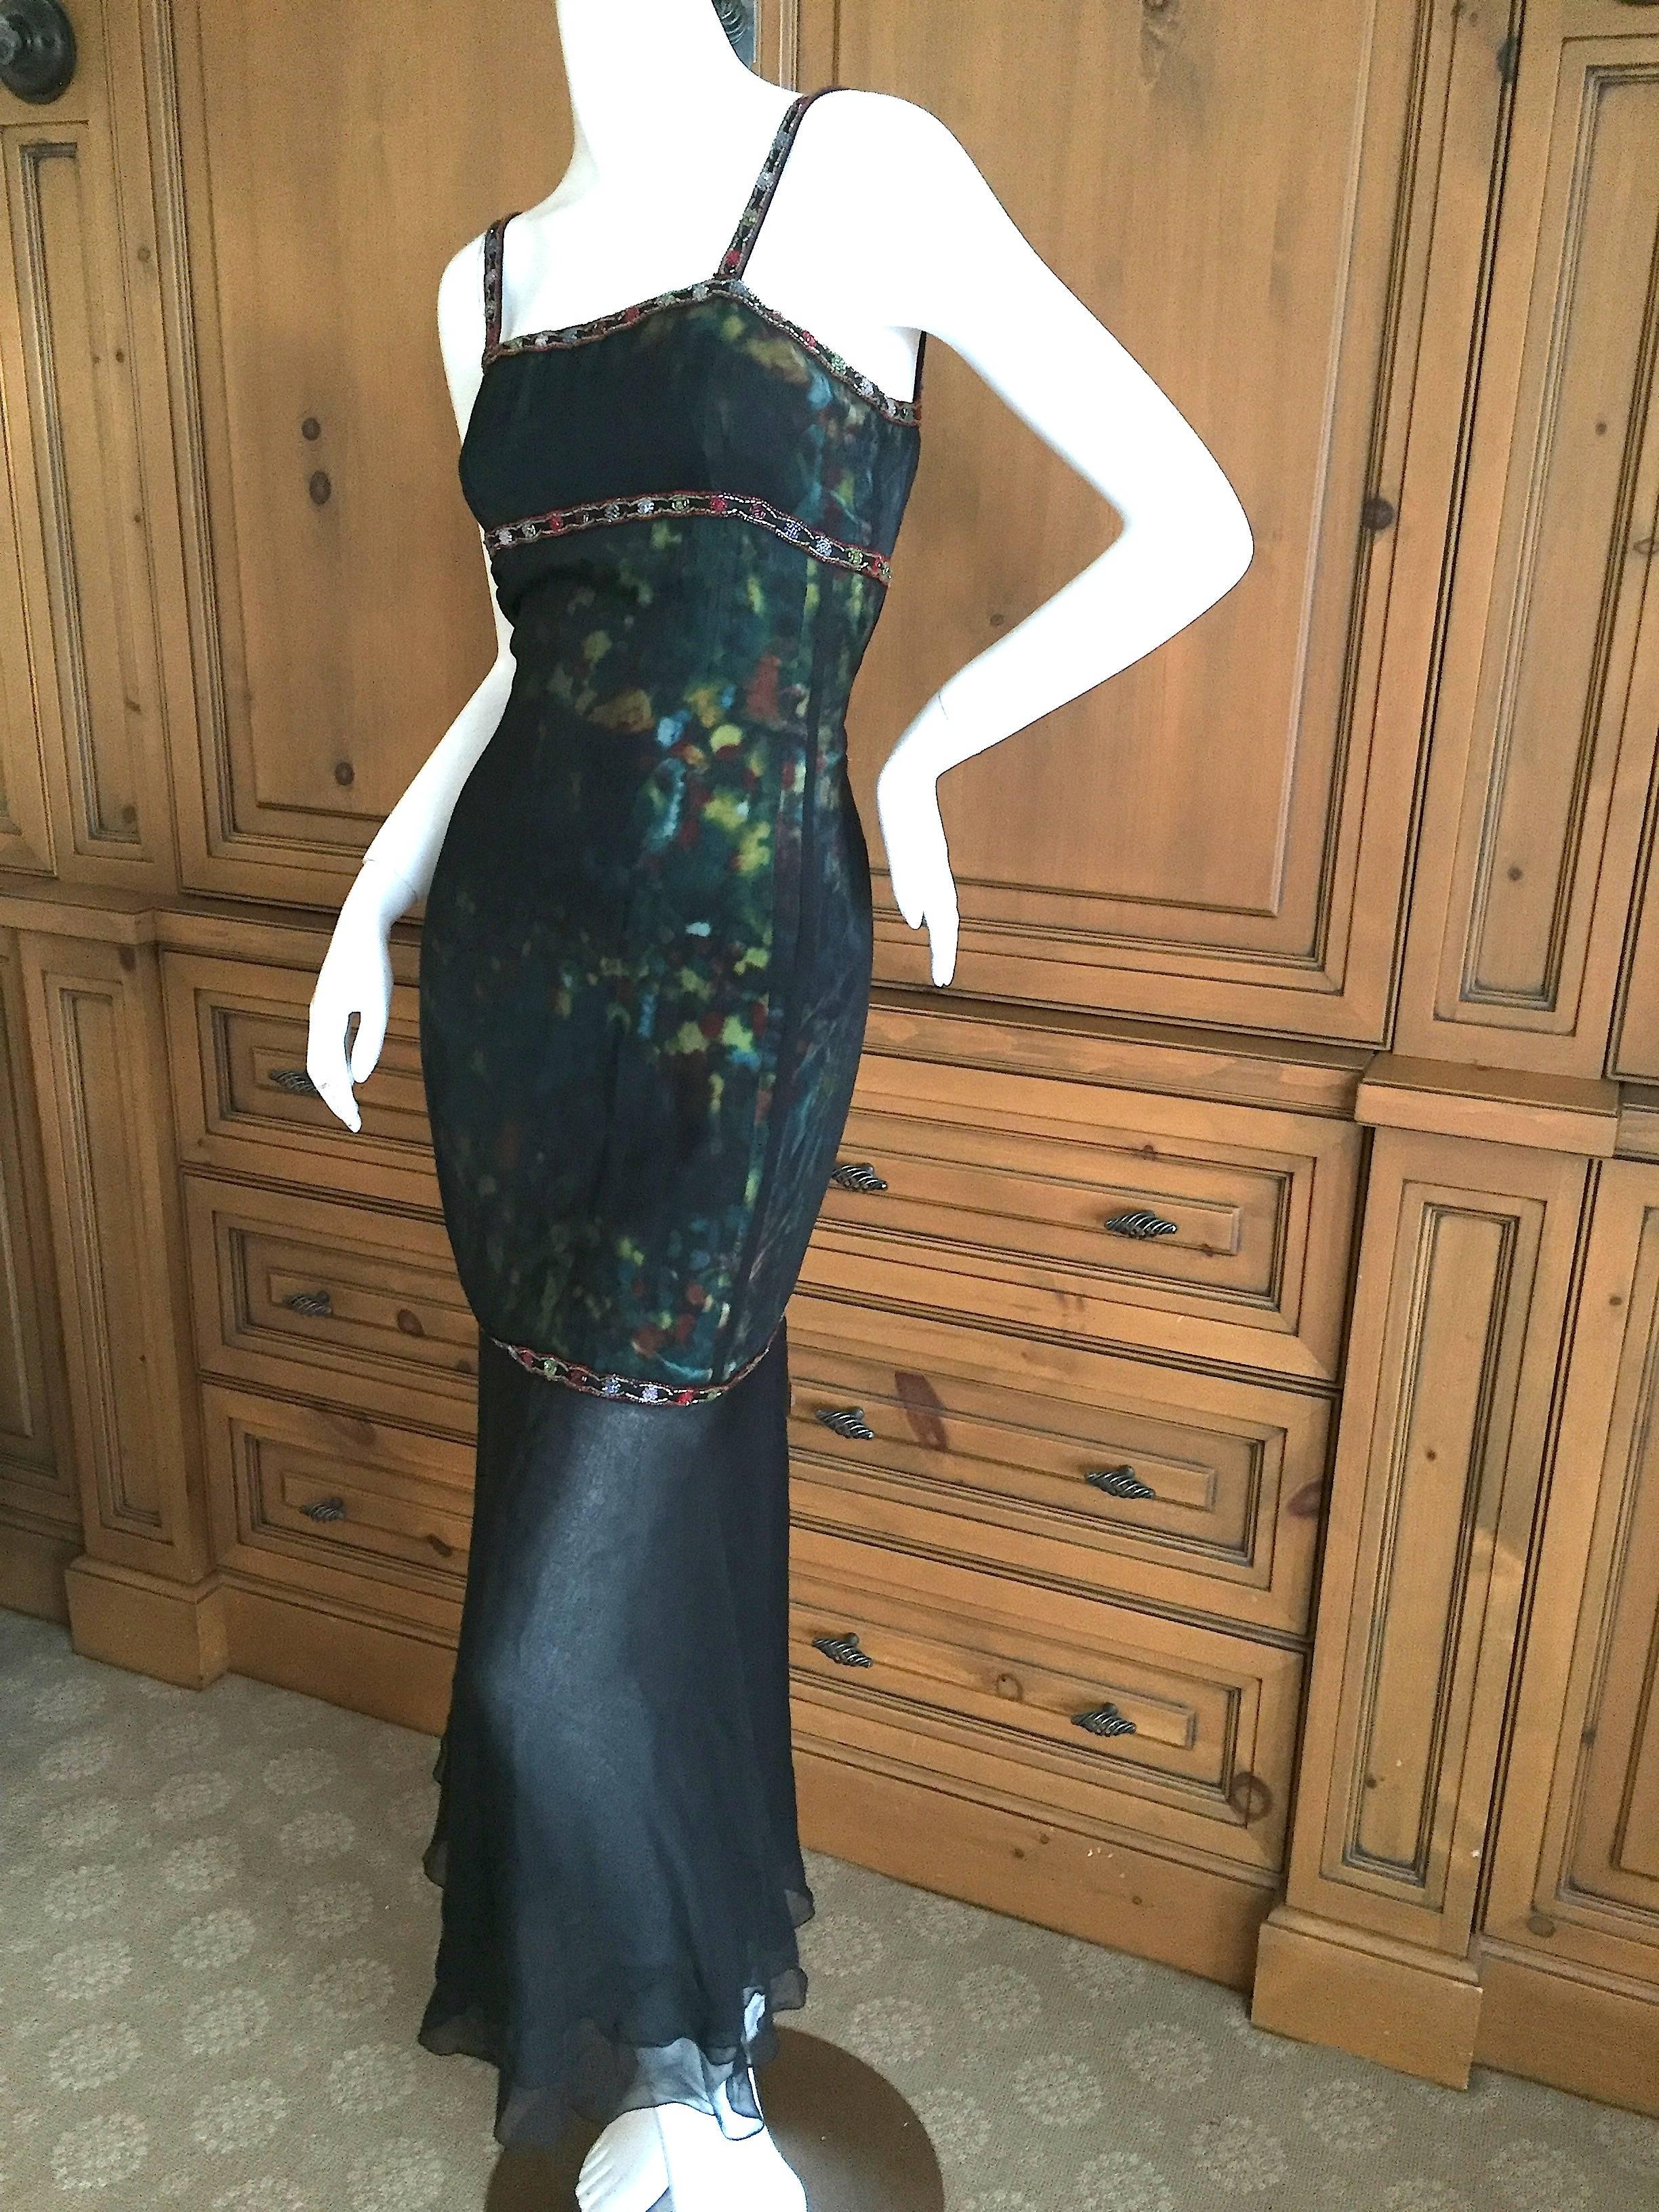 Darkly romantic silk overlay dress with beaded embellishments from Chanel.
There is a digital print underneath the sheer silk, with Lesage beading on strips across the dress. Much prettier in person.
From Autumn 1997
Size 38
Bust 35